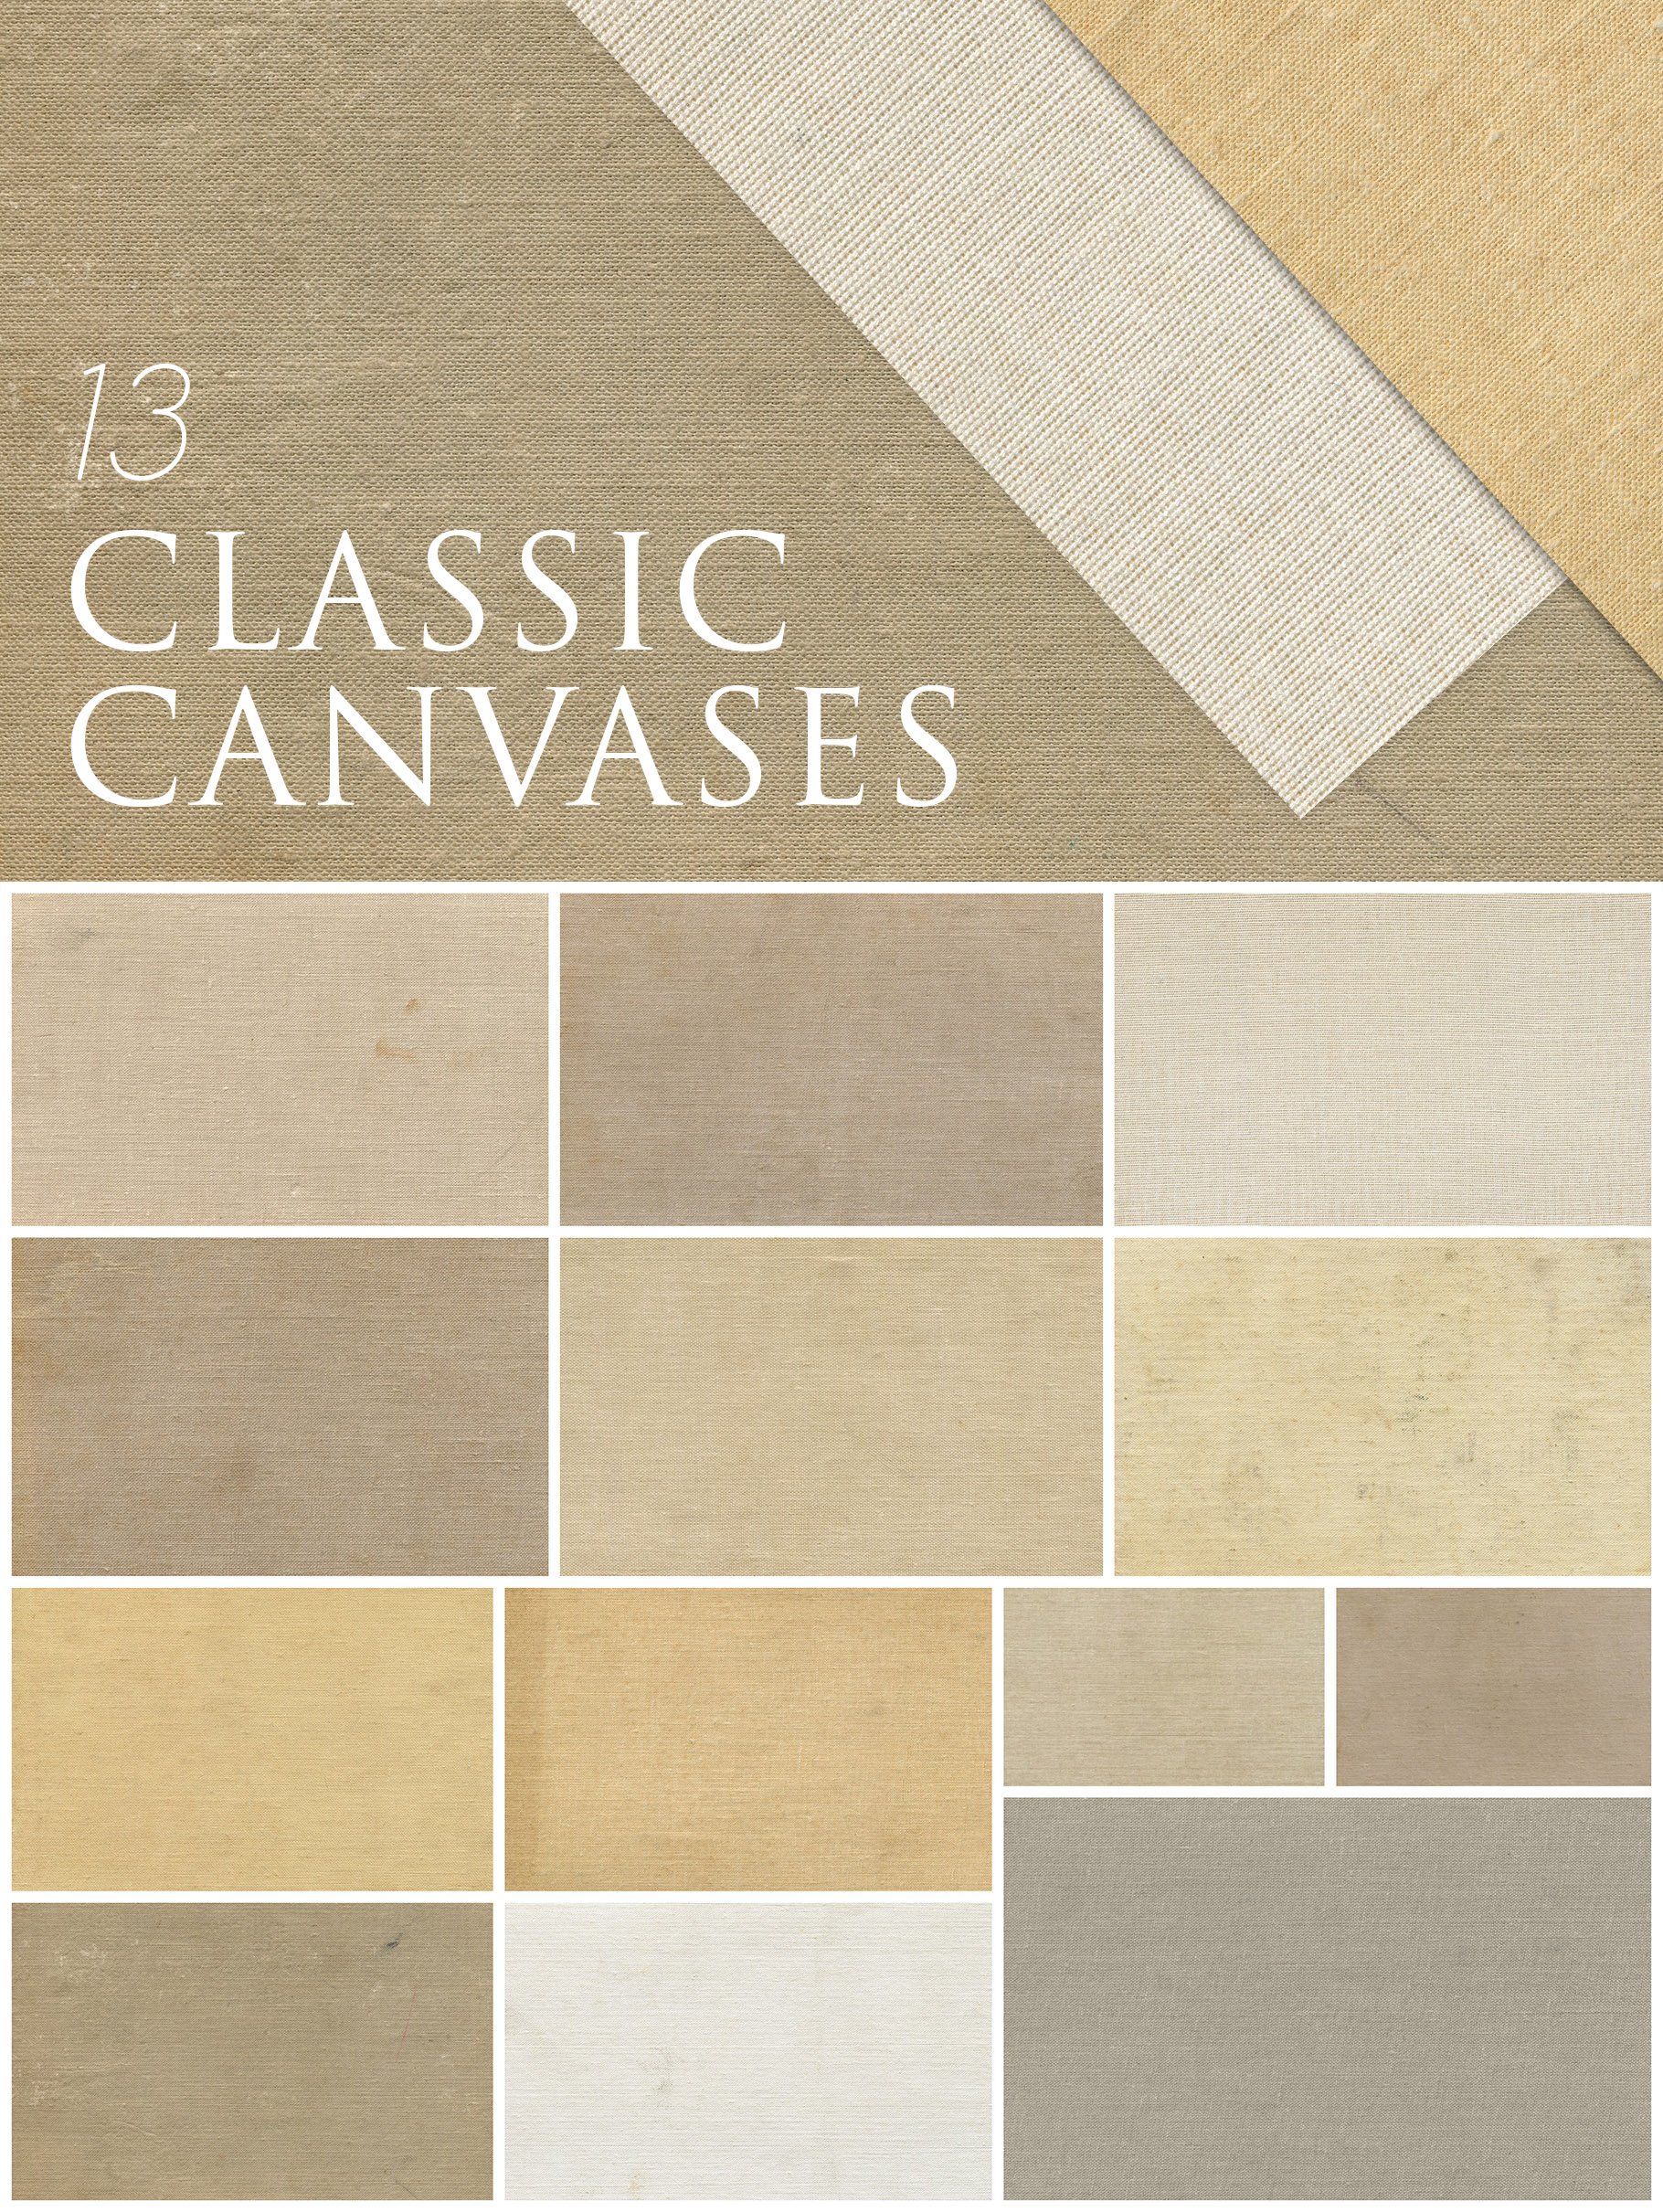 preview 3 classic canvases 887